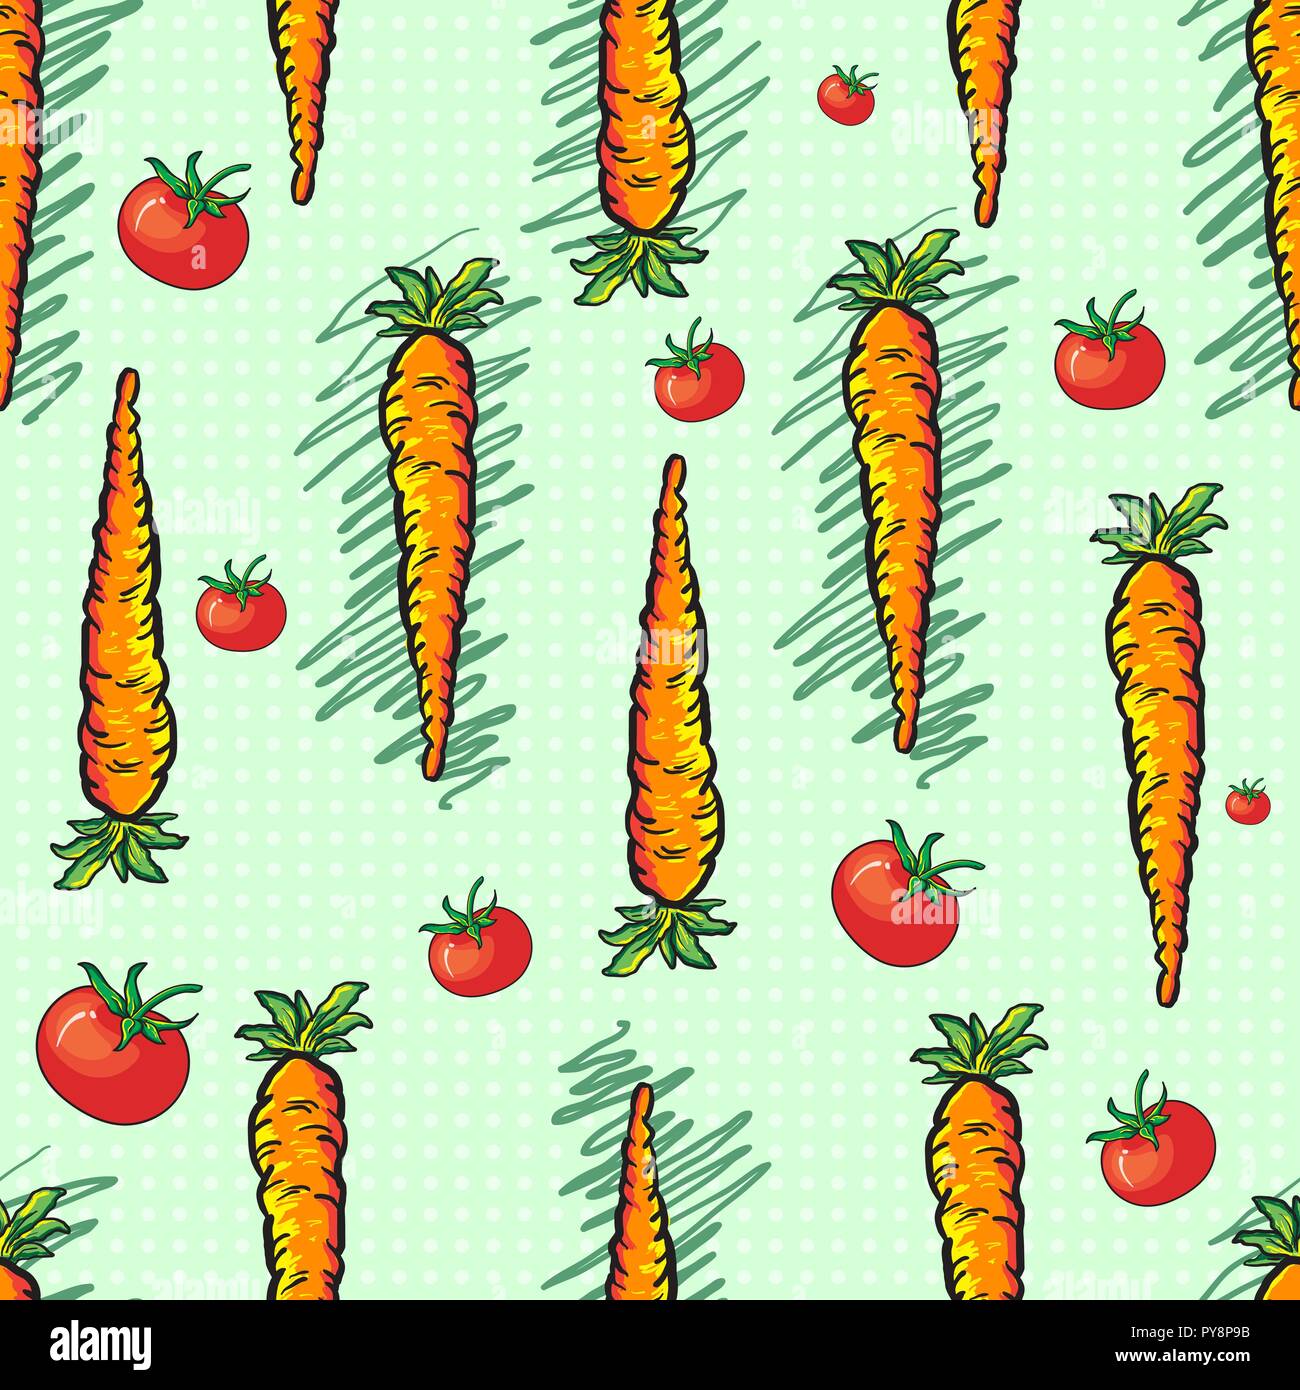 Carrots and tomatoes seamless pattern on light green polkadot background perfect for wallpaper, texture, fabric, and printed Stock Vector